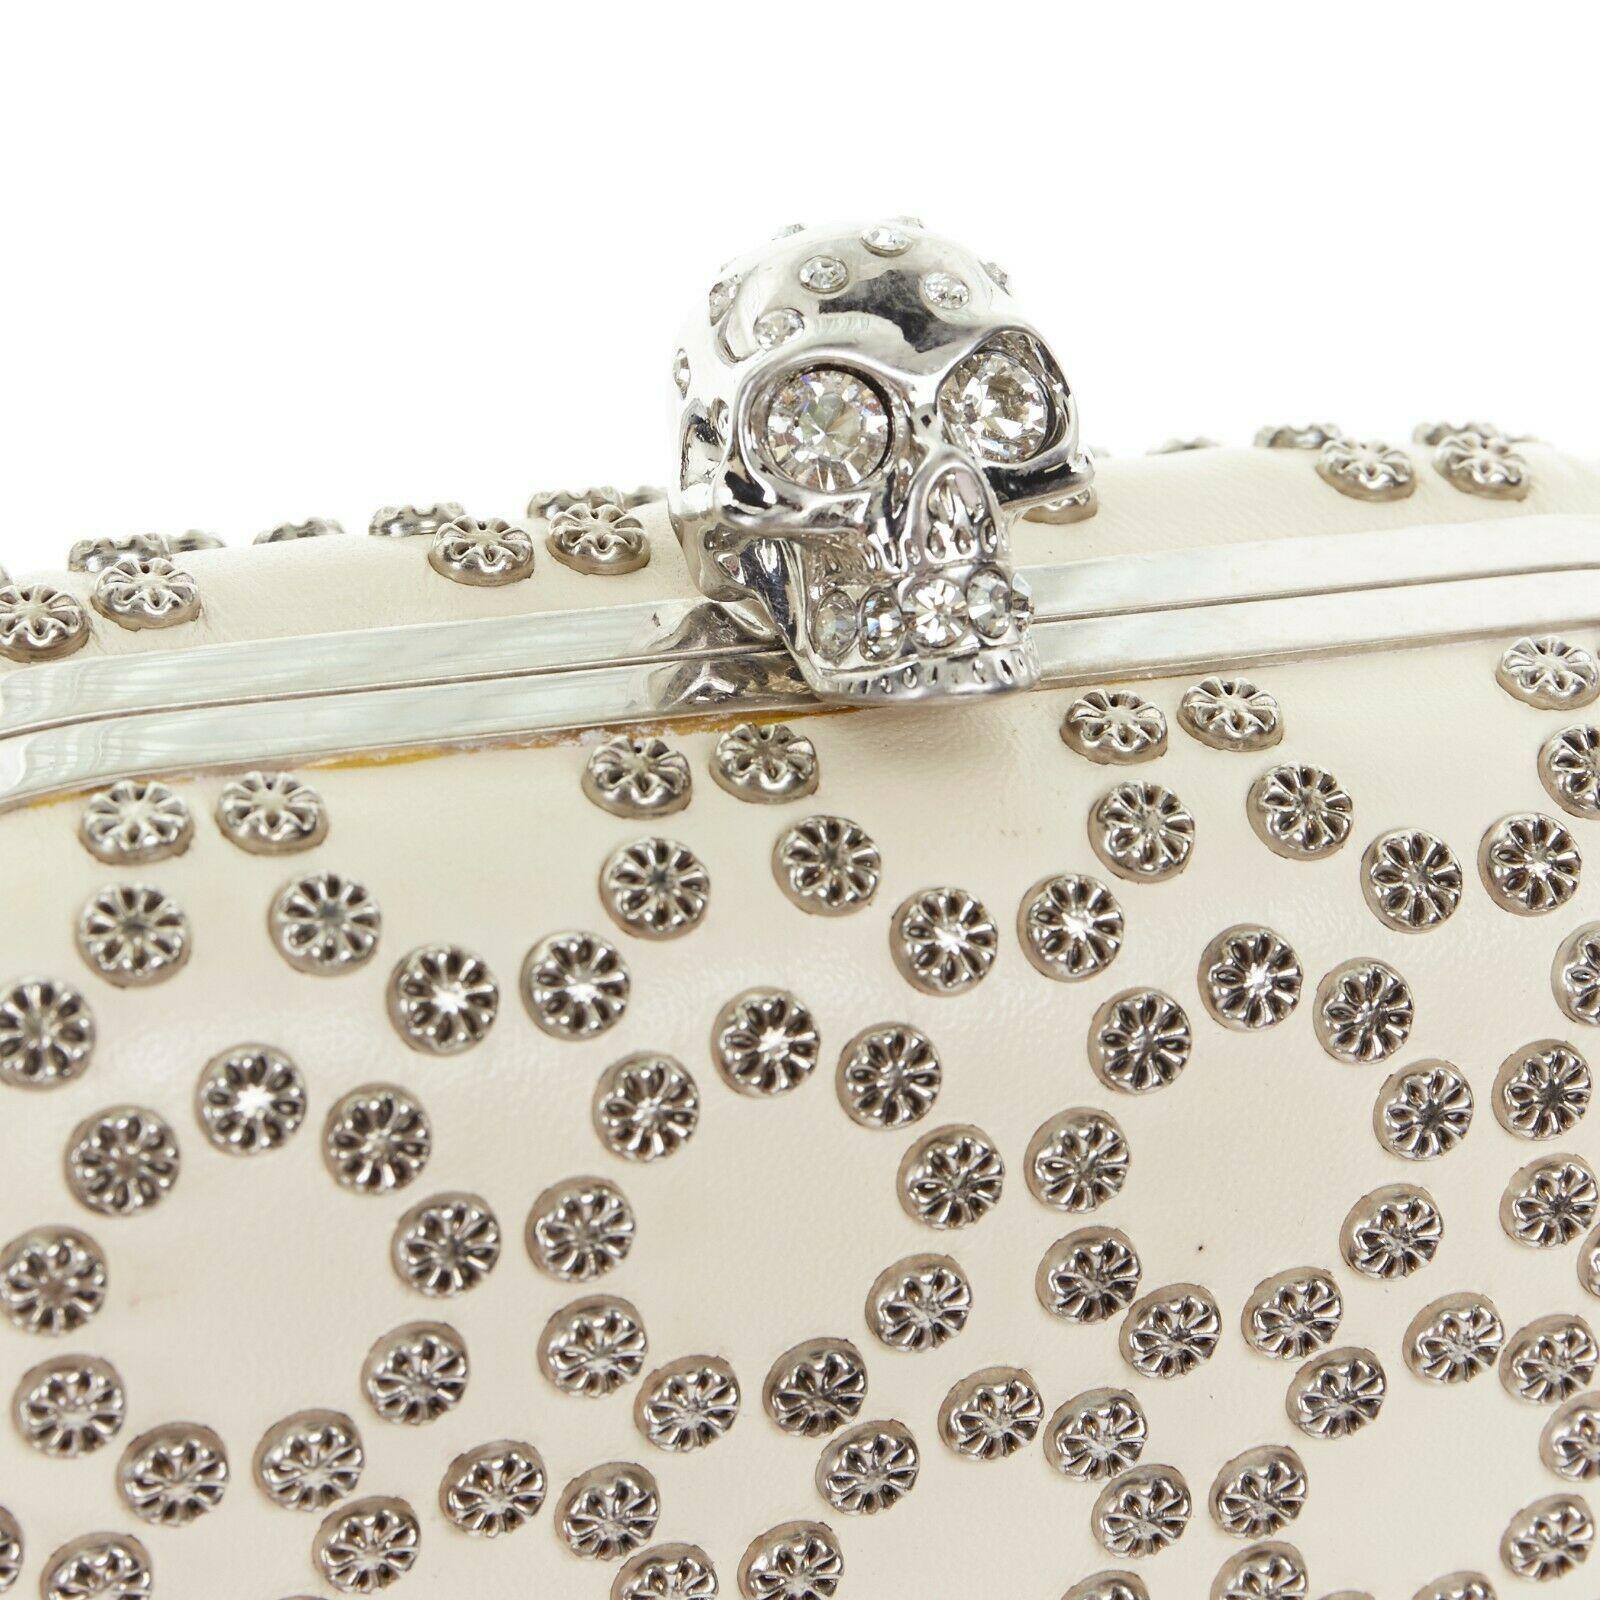 ALEXANDER MCQUEEN cream leather silver stud crystal embellished skull box clutch

ALEXANDER MCQUEEN
Light grey/beige supple soft leather upper. Silver-tone stud embellishment in honeycomb pattern. Intentional aged effect metal  frame. Skull clasp